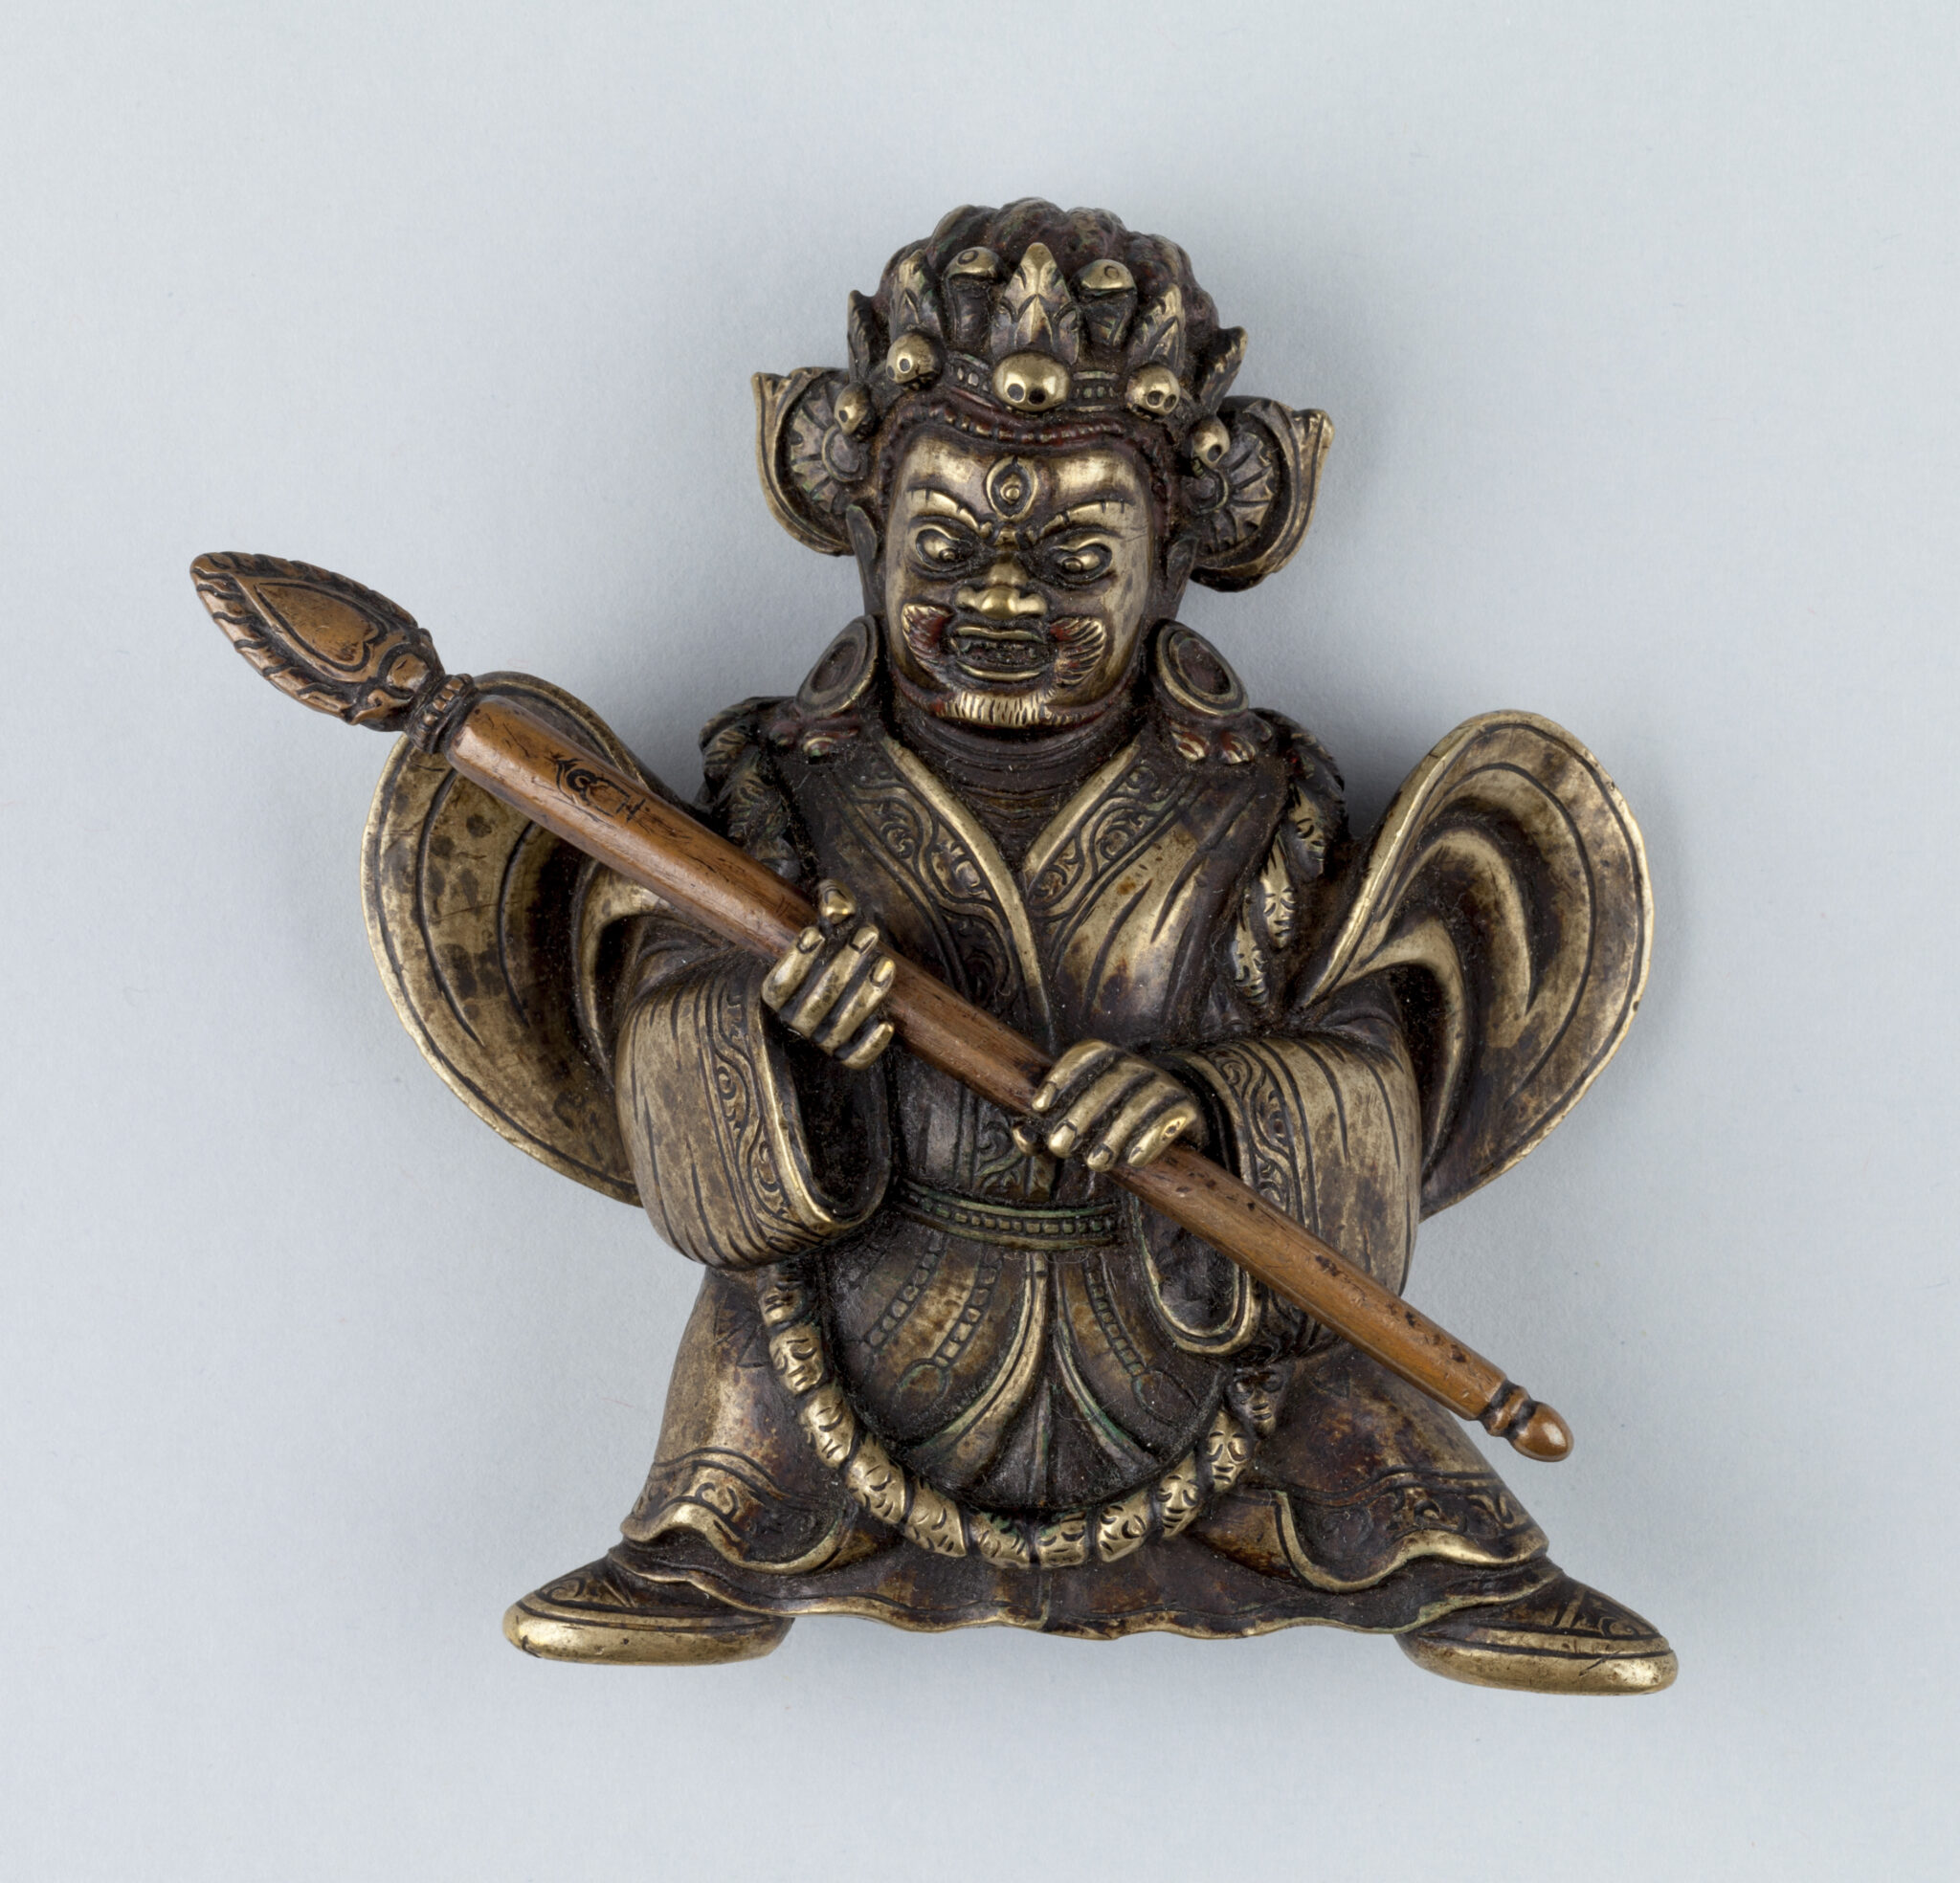 Tarnished brass-colored sculpture depicting wrathful deity wearing crown and billowing robes holding staff across body